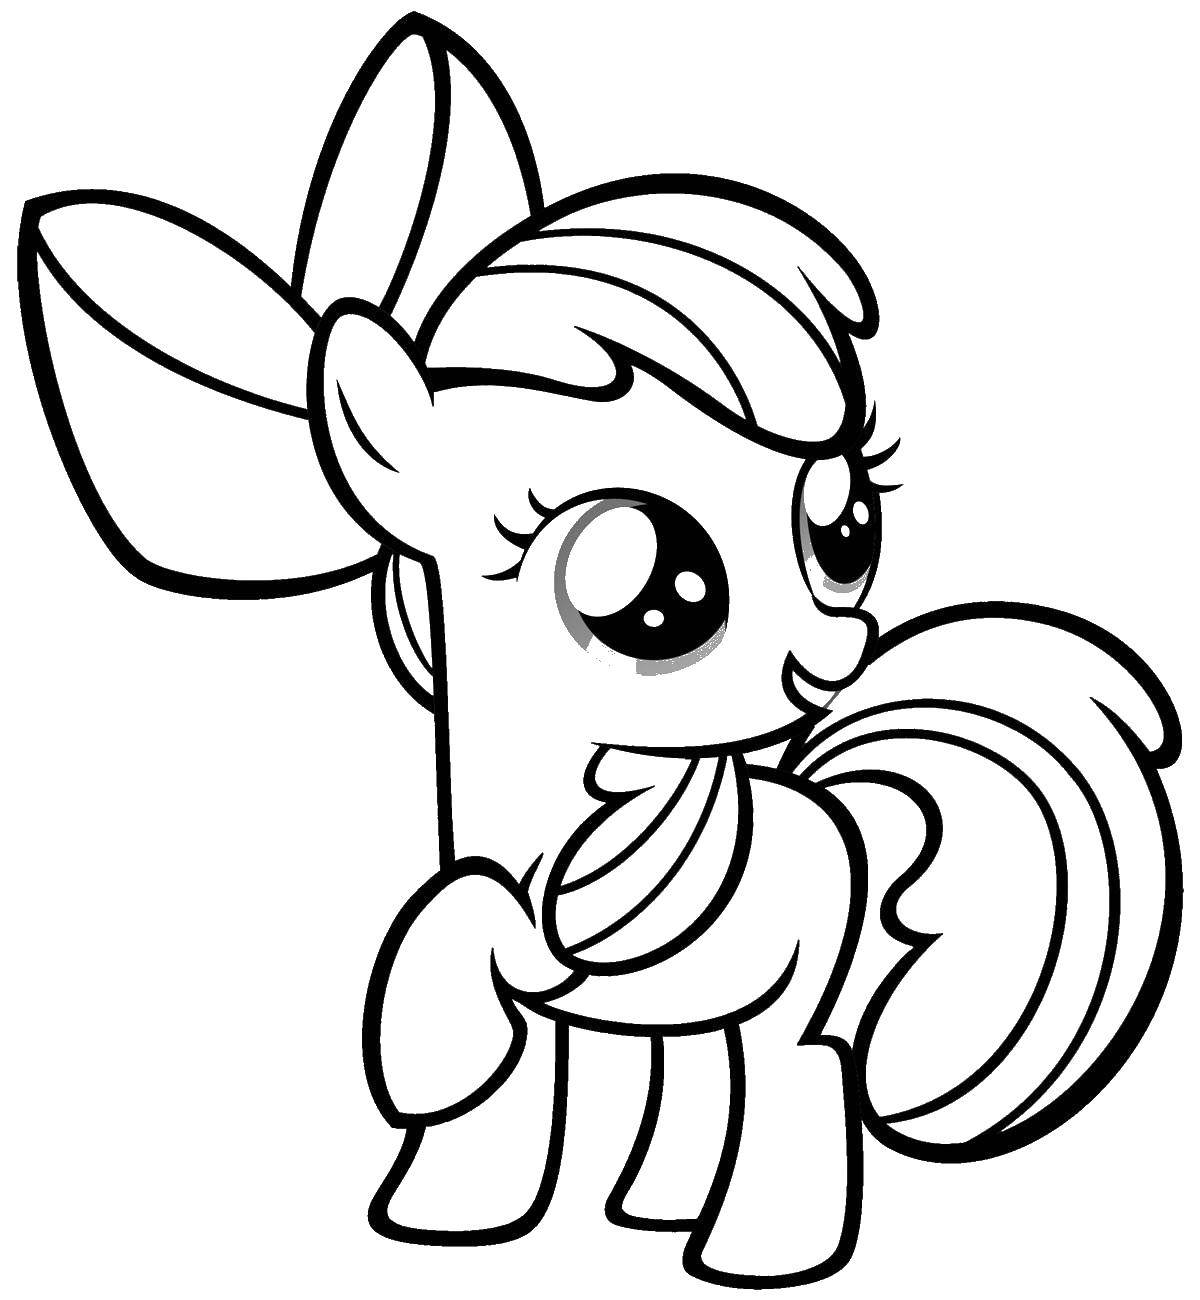 Coloring Ponies from my little pony . Category Ponies. Tags:  Pony, My little pony .